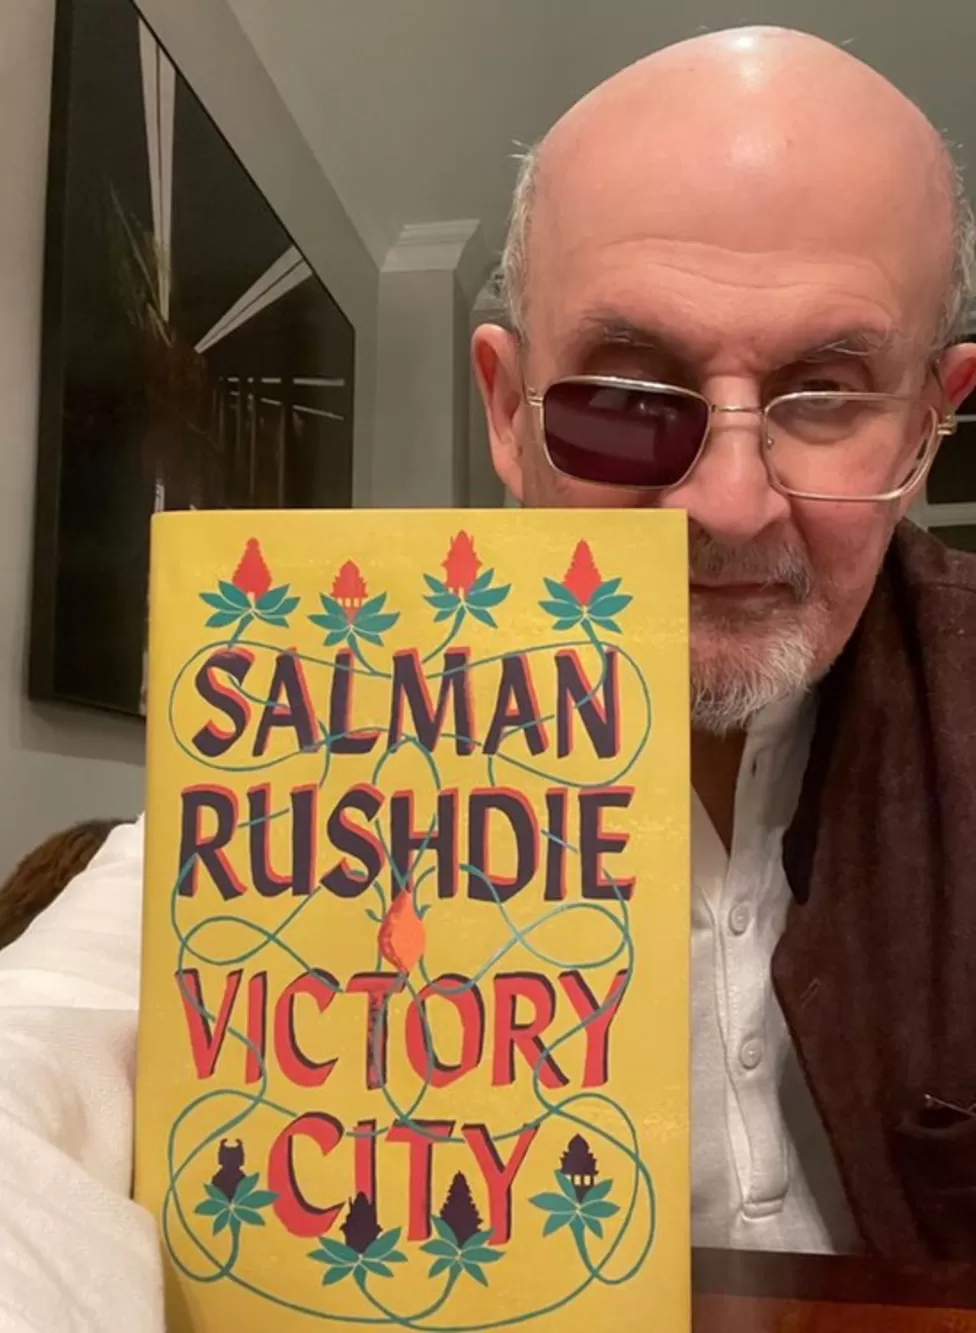 "I've found it very difficult to write" - Salman Rushdie speaks for the first time after he was stabbed last year and lost an eye for his 1988 novel The Satanic Verses